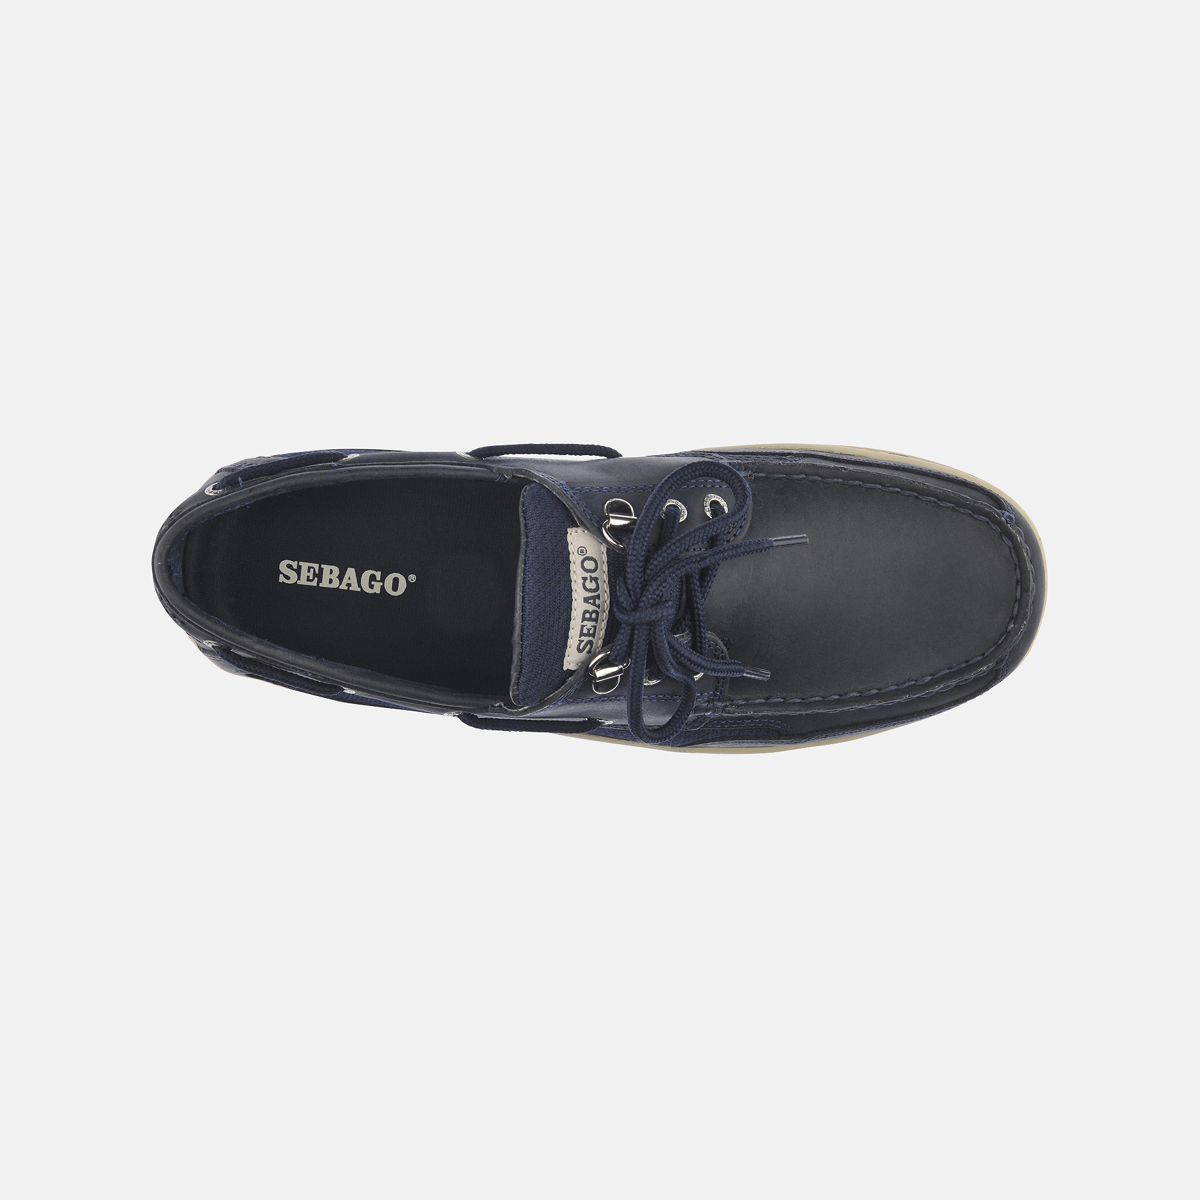 Sebago Clovehitch II chaussures bateau homme blue navy leather, taille 44 (US 10)